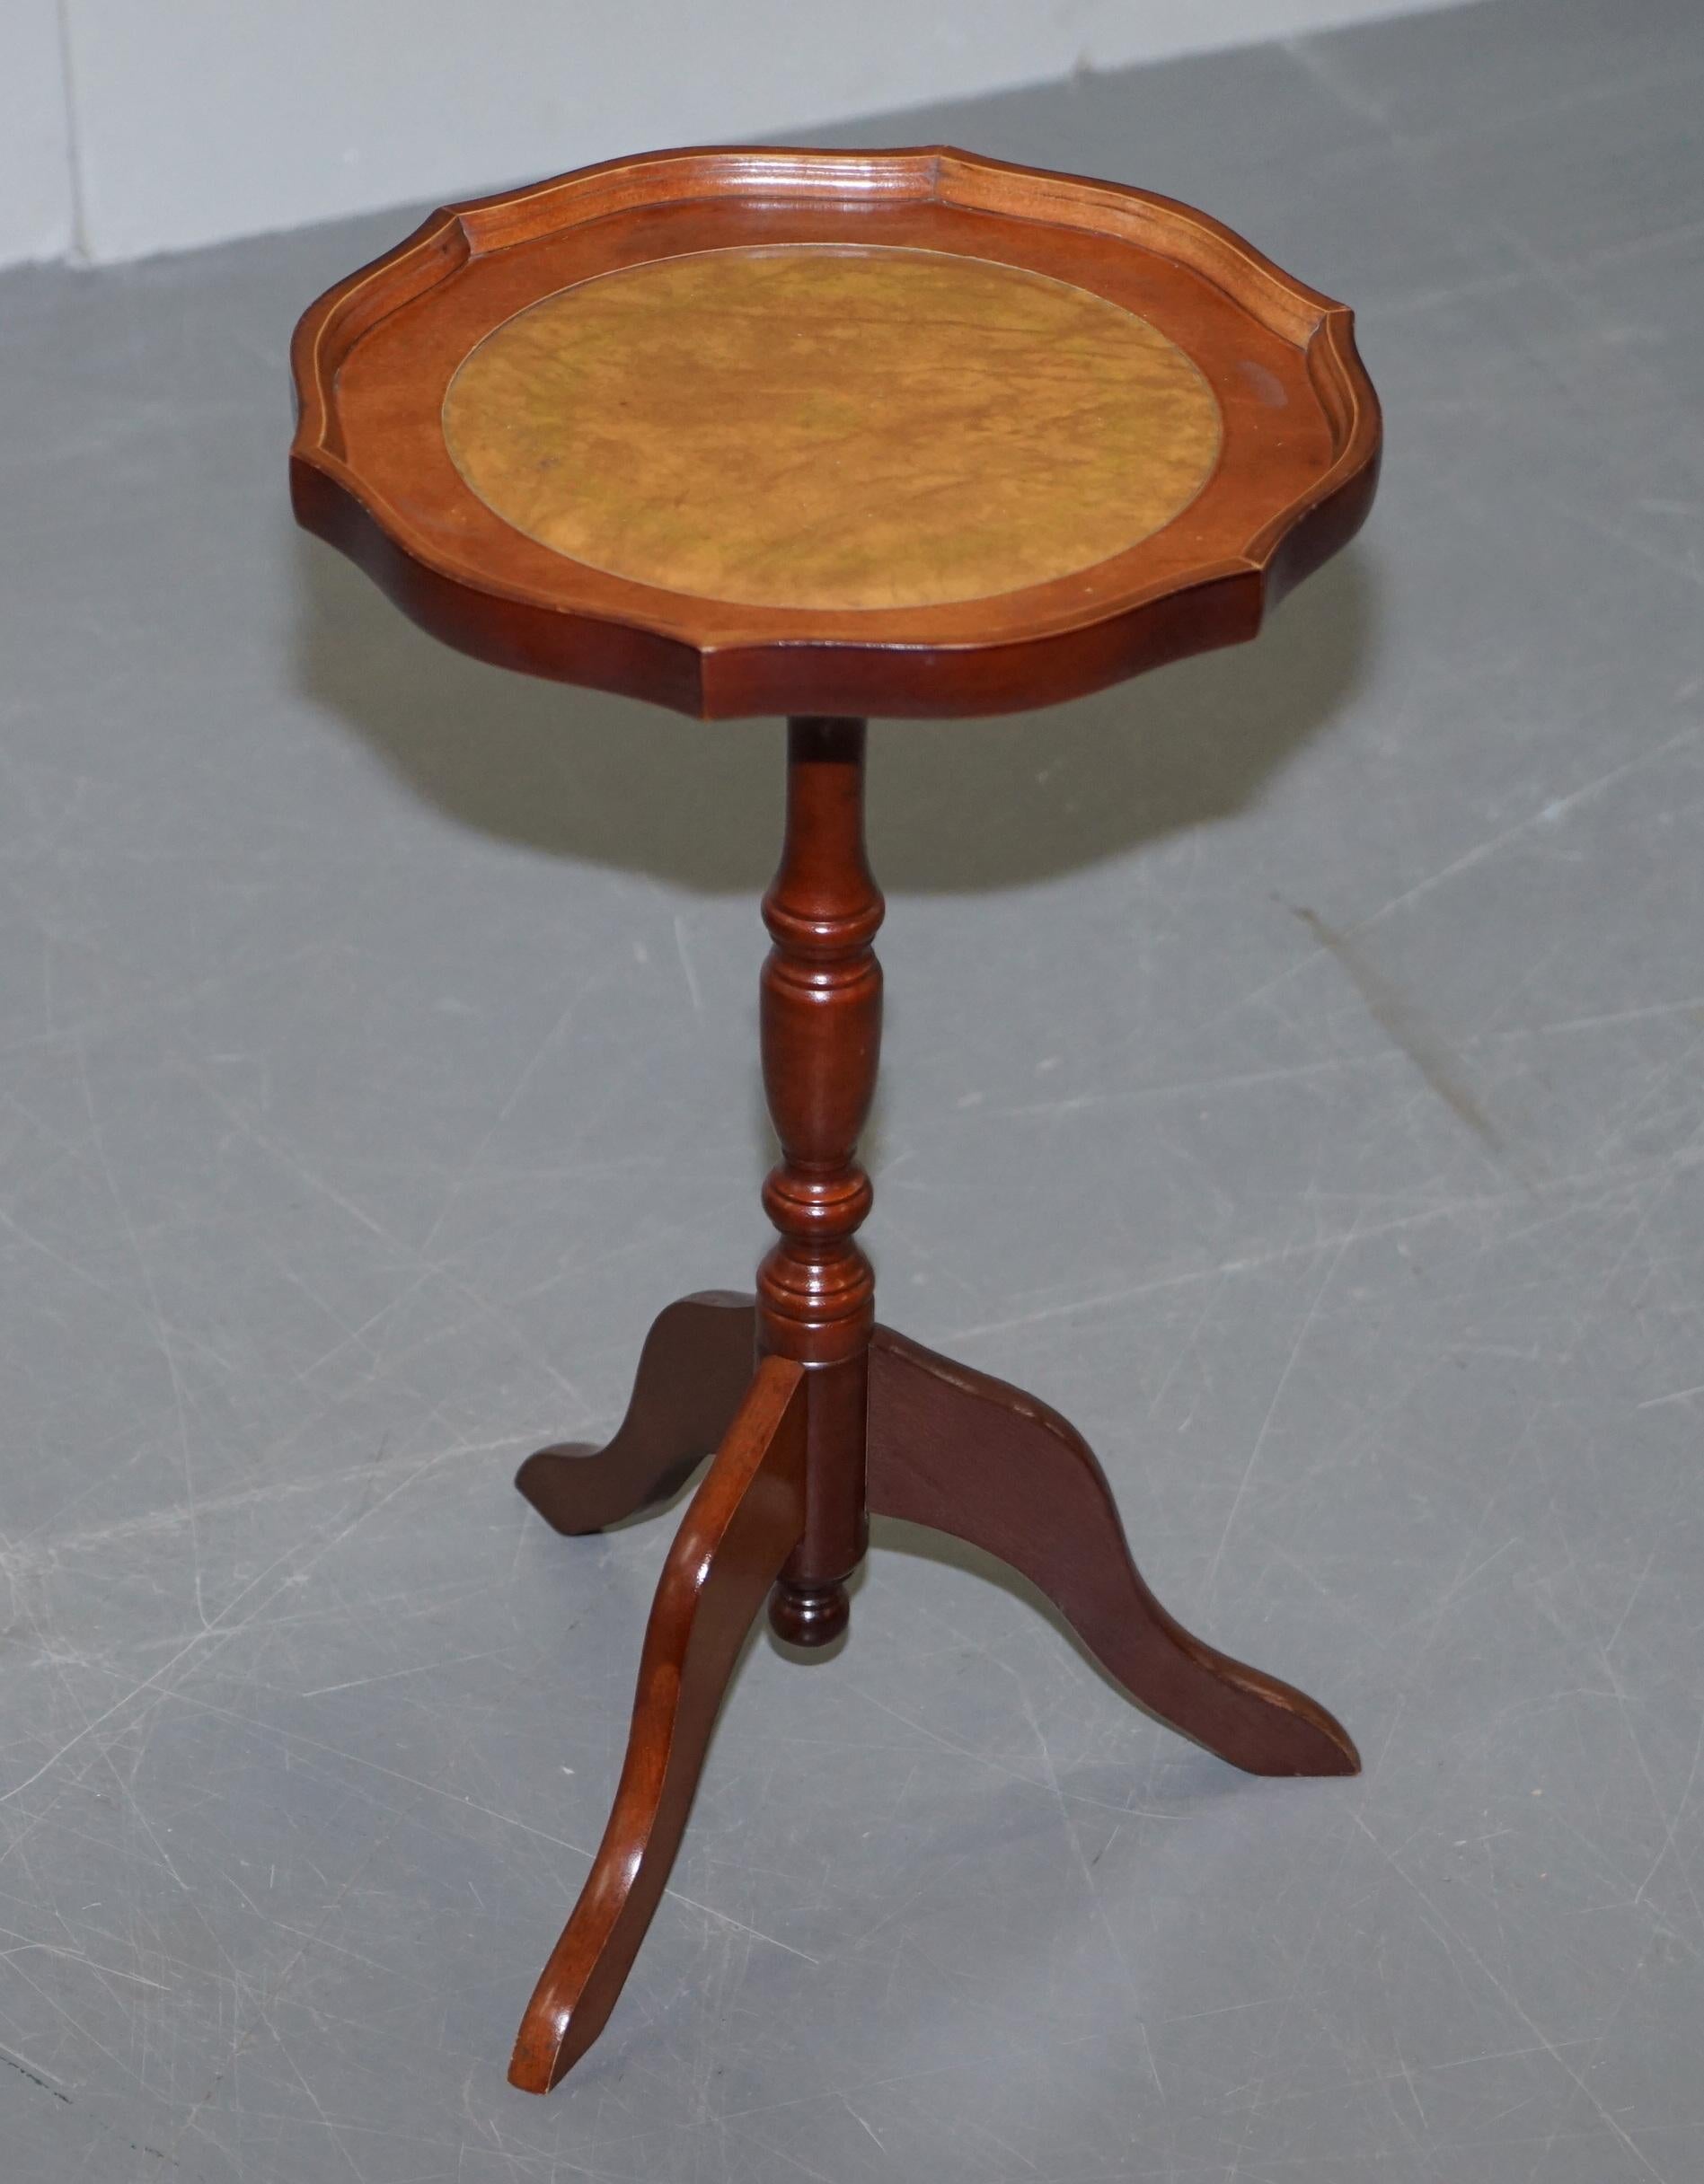 Victorian Bevan Funell Charming Brown Leather Vintage Hardwood Tripod Lamp Side End Table For Sale